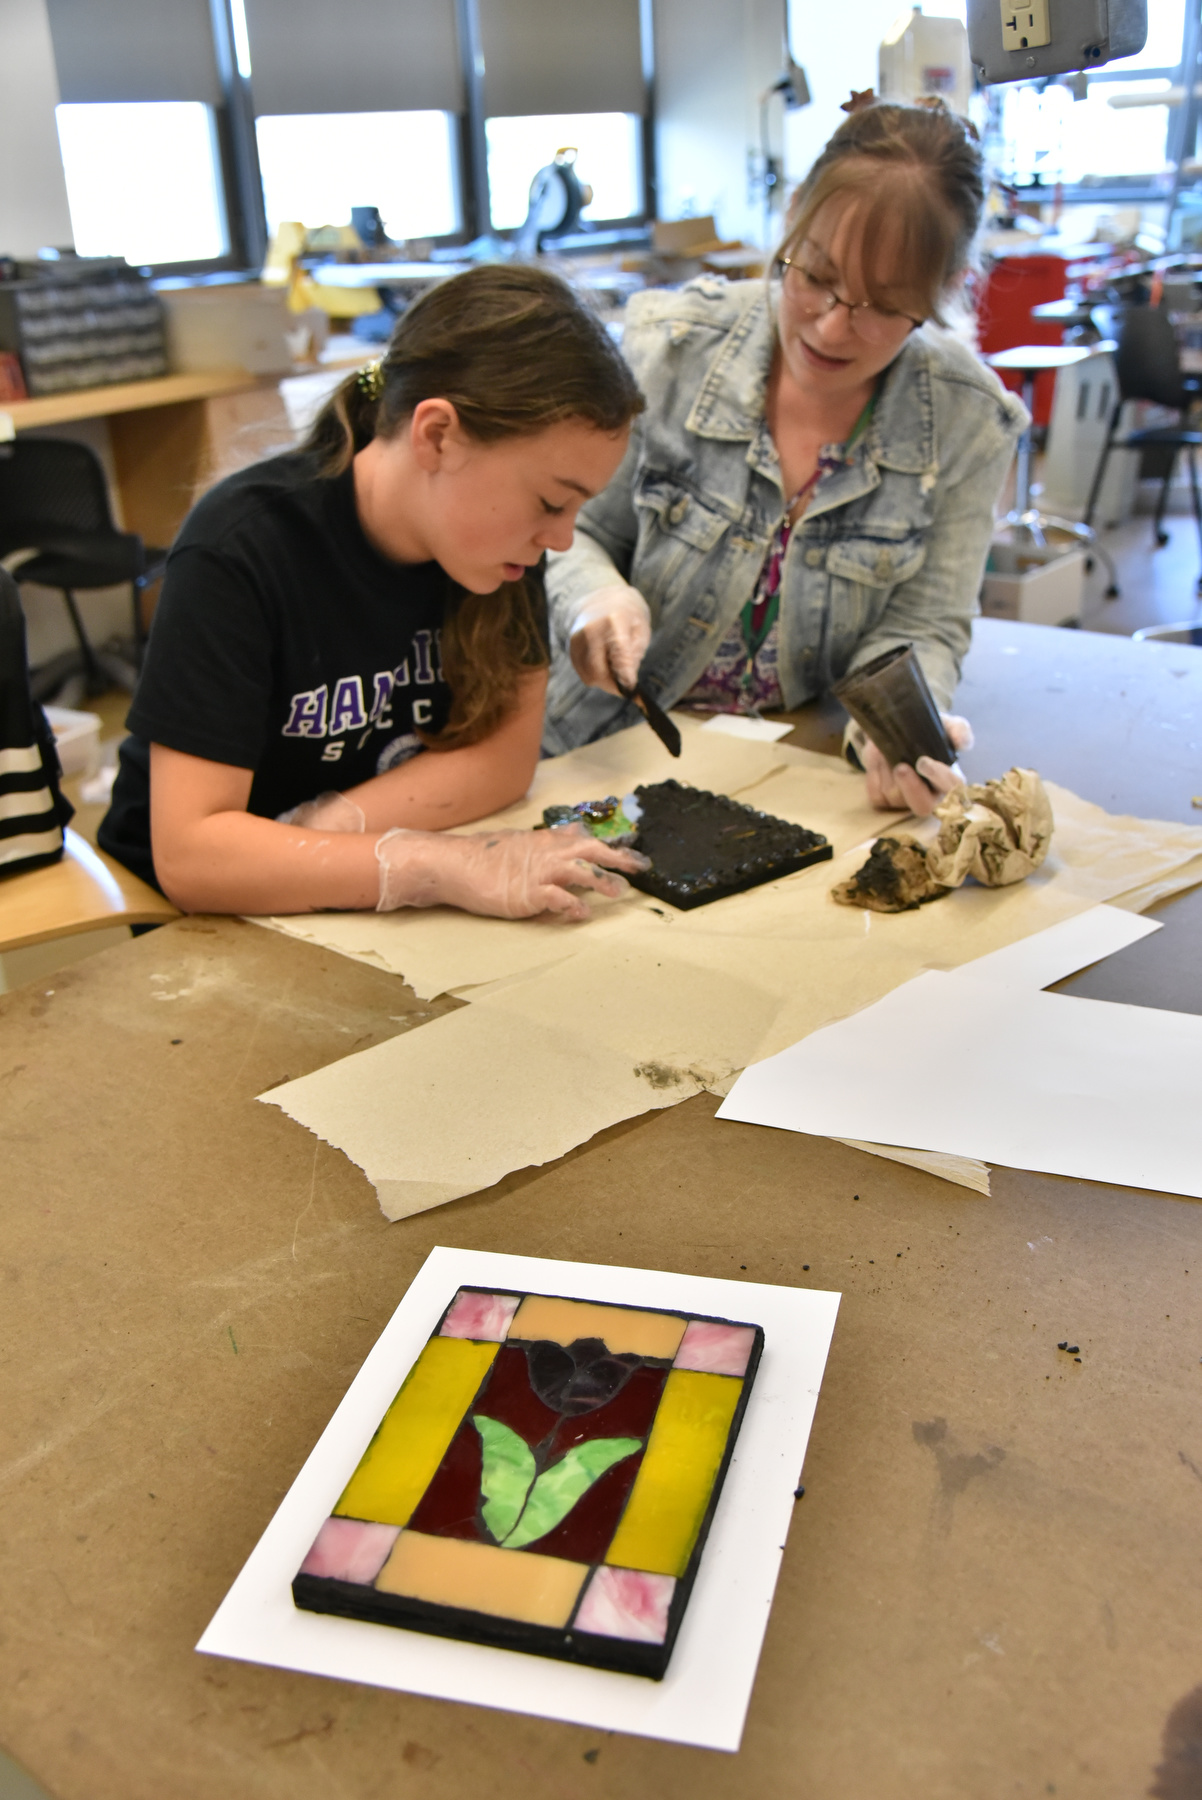 The 44th annual Sheldon Institute for Barbara Shineman Scholars program, which ran this summer from July 24 to Aug. 4, provided children entering grades two through ten wonderful opportunities to explore their interests and develop their skills in fun and creative ways in class sessions led by professional educators. Lauren Boyer (right) teaches art painting, stained glass collage and air dry clay sessions in Park Hall.